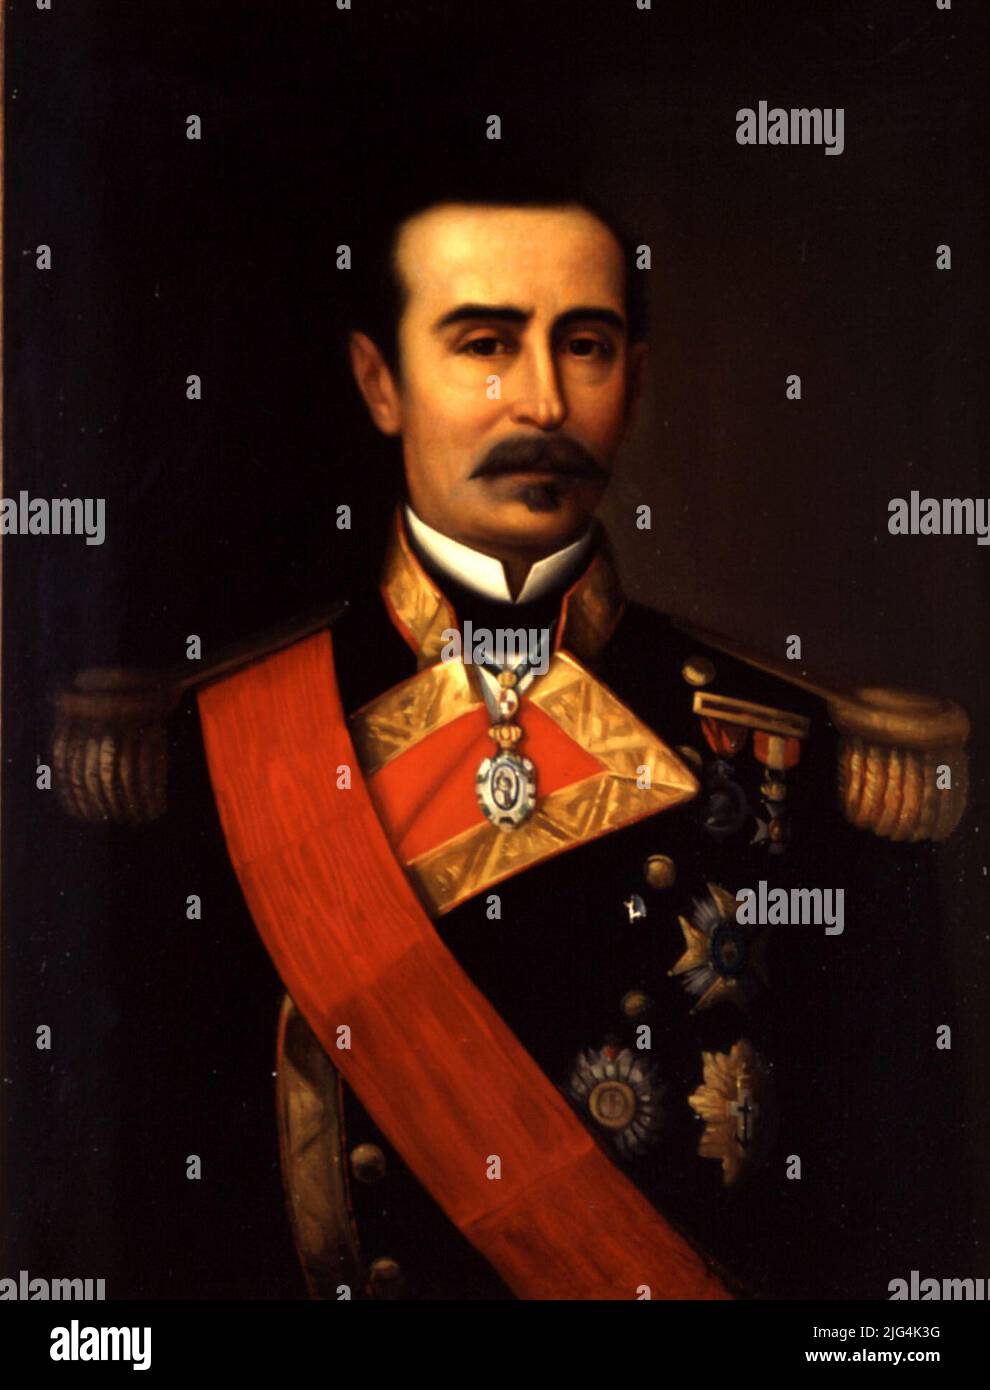 Portrait of Captain Javier Salas Rodríguez (1832-1890). Portrait. Portraits 6. 1933 appears a request from Javier de Salas, vice councilor of the Navy so that the portrait of his father will be placed in the museum; It is answered that a copy will be made by the painter of the museum. Francisco Javier Salas: Gala uniform bust with a medal, Cruz and Rodríguez. Three big crosses, a band and necklace of the Academy of History. Neutral background. Stock Photo